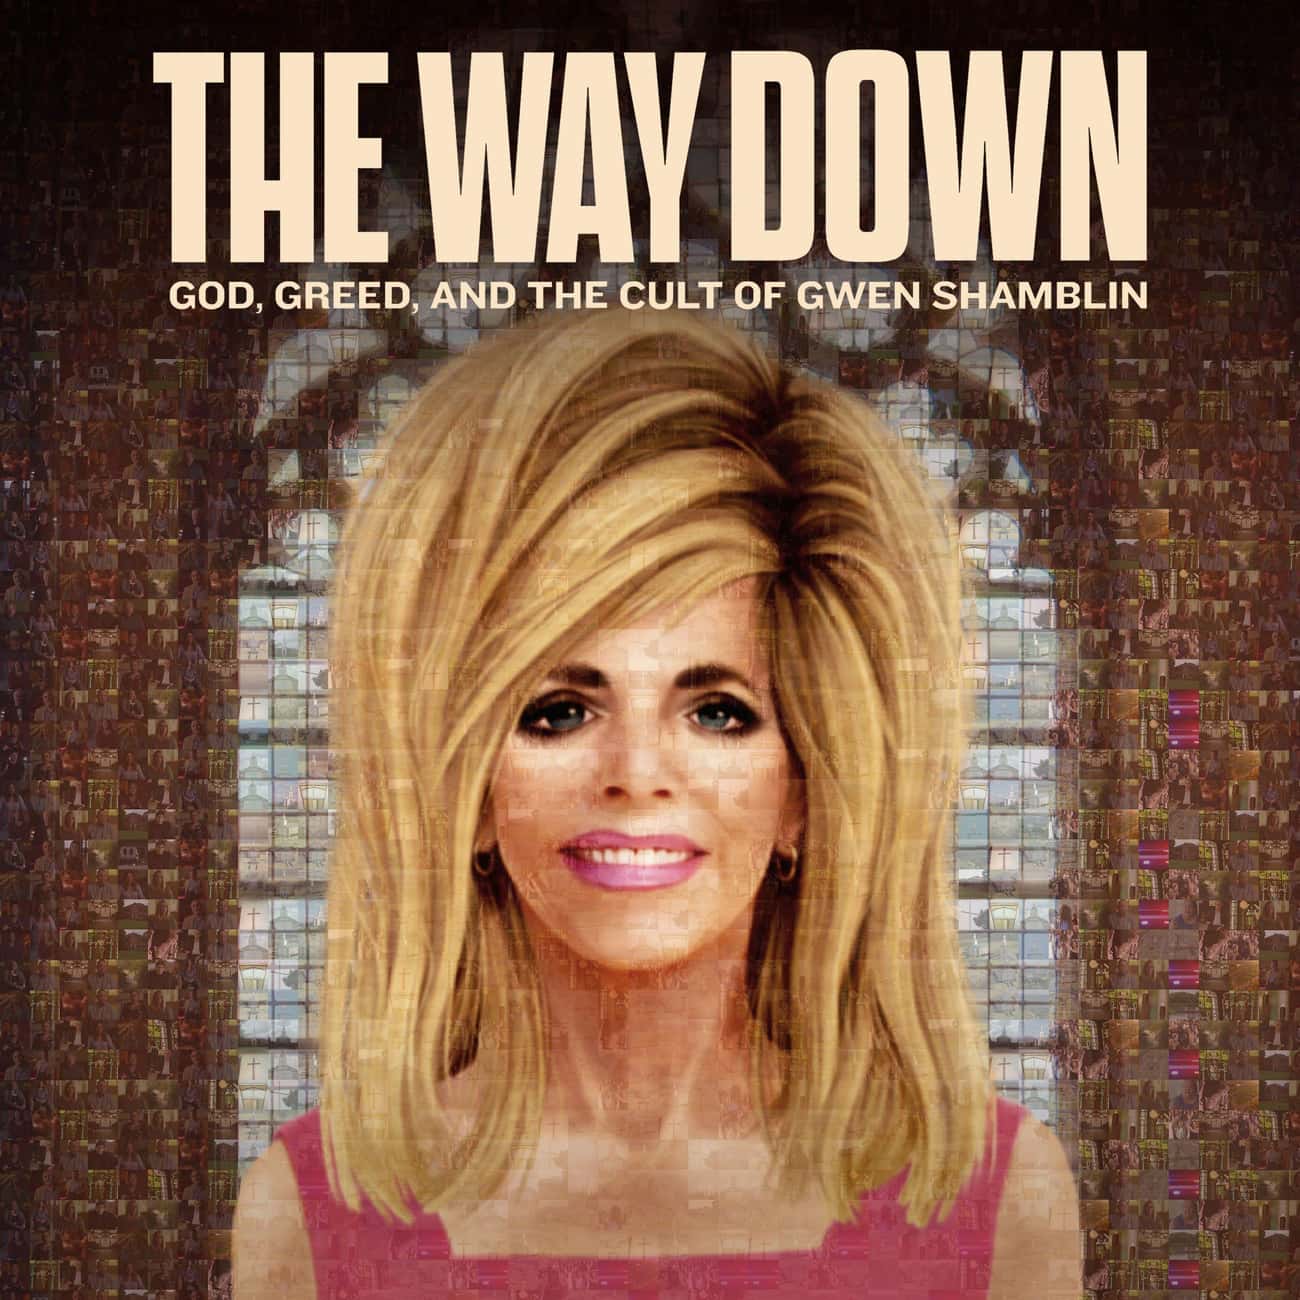 'The Way Down: God, Greed, and the Cult of Gwen Shamblin' Centers Around The Leader Of A Church That Emphasizes Weight Loss